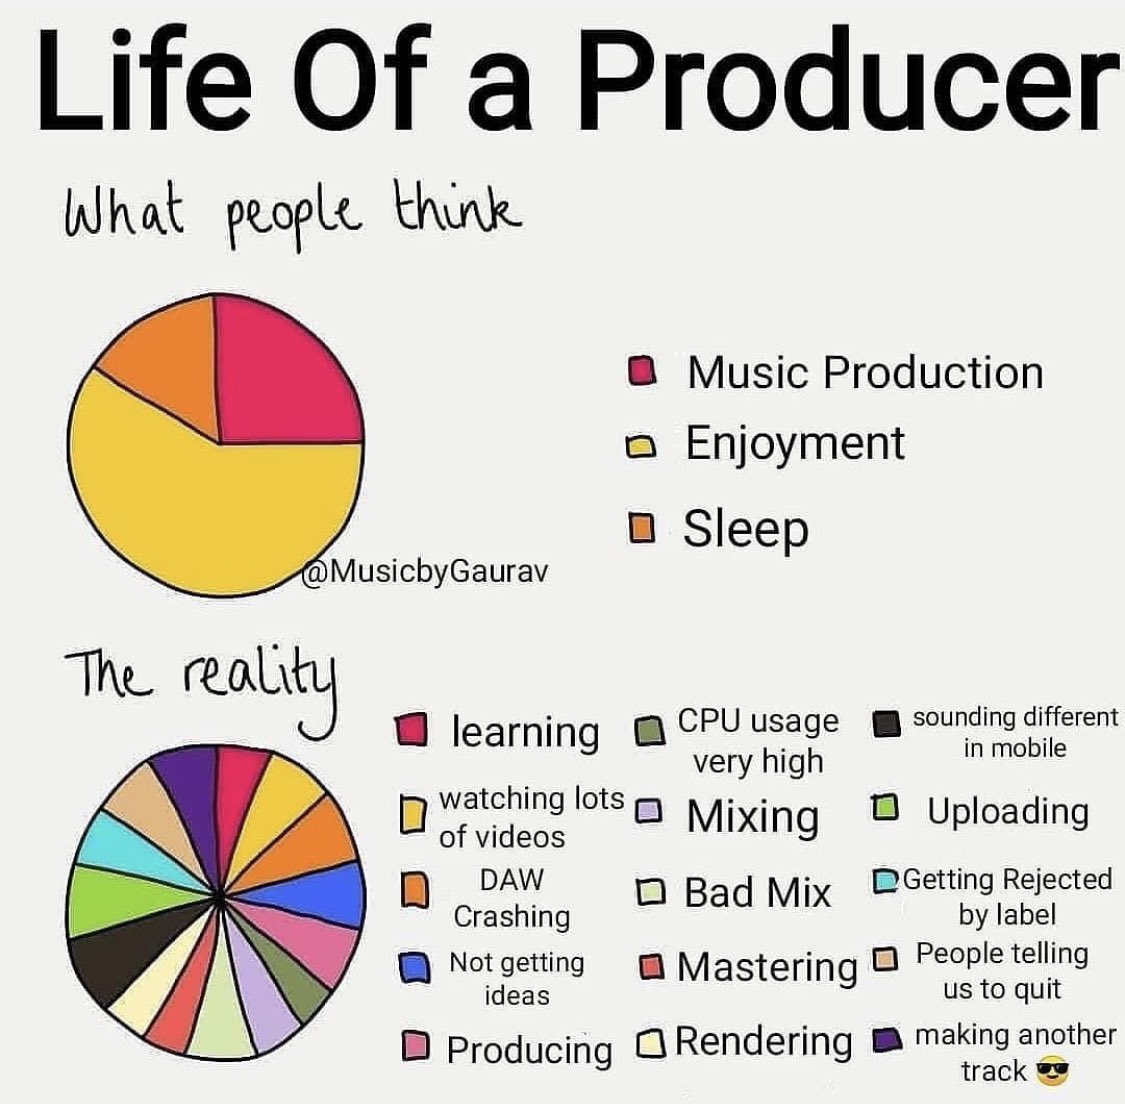 Perception vs. Reality.

What say you, anything else you’d add to the below? 

#musicproducer #MondayMorning #electronicmusic #LifeOfAProducer